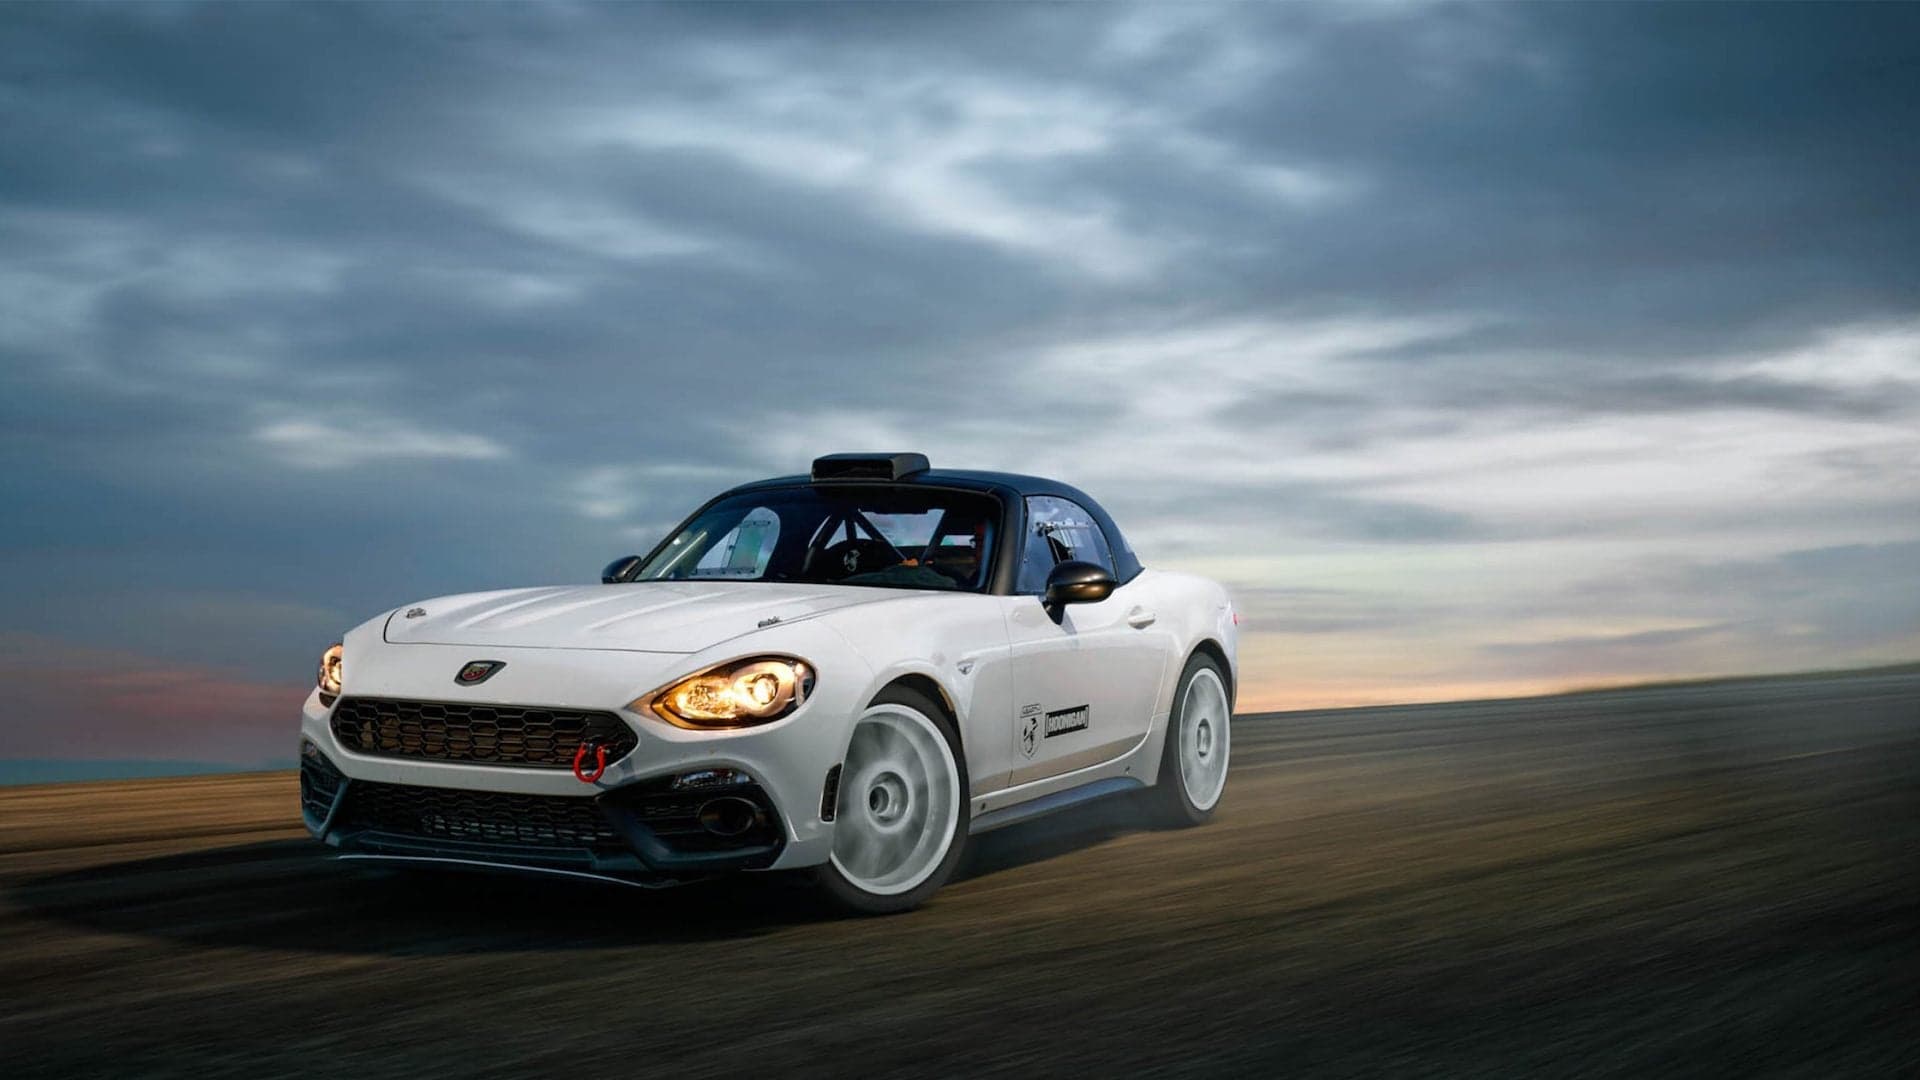 Hoonigan Is Looking for a Female Rally Driver for its Custom Fiat 124 Spider